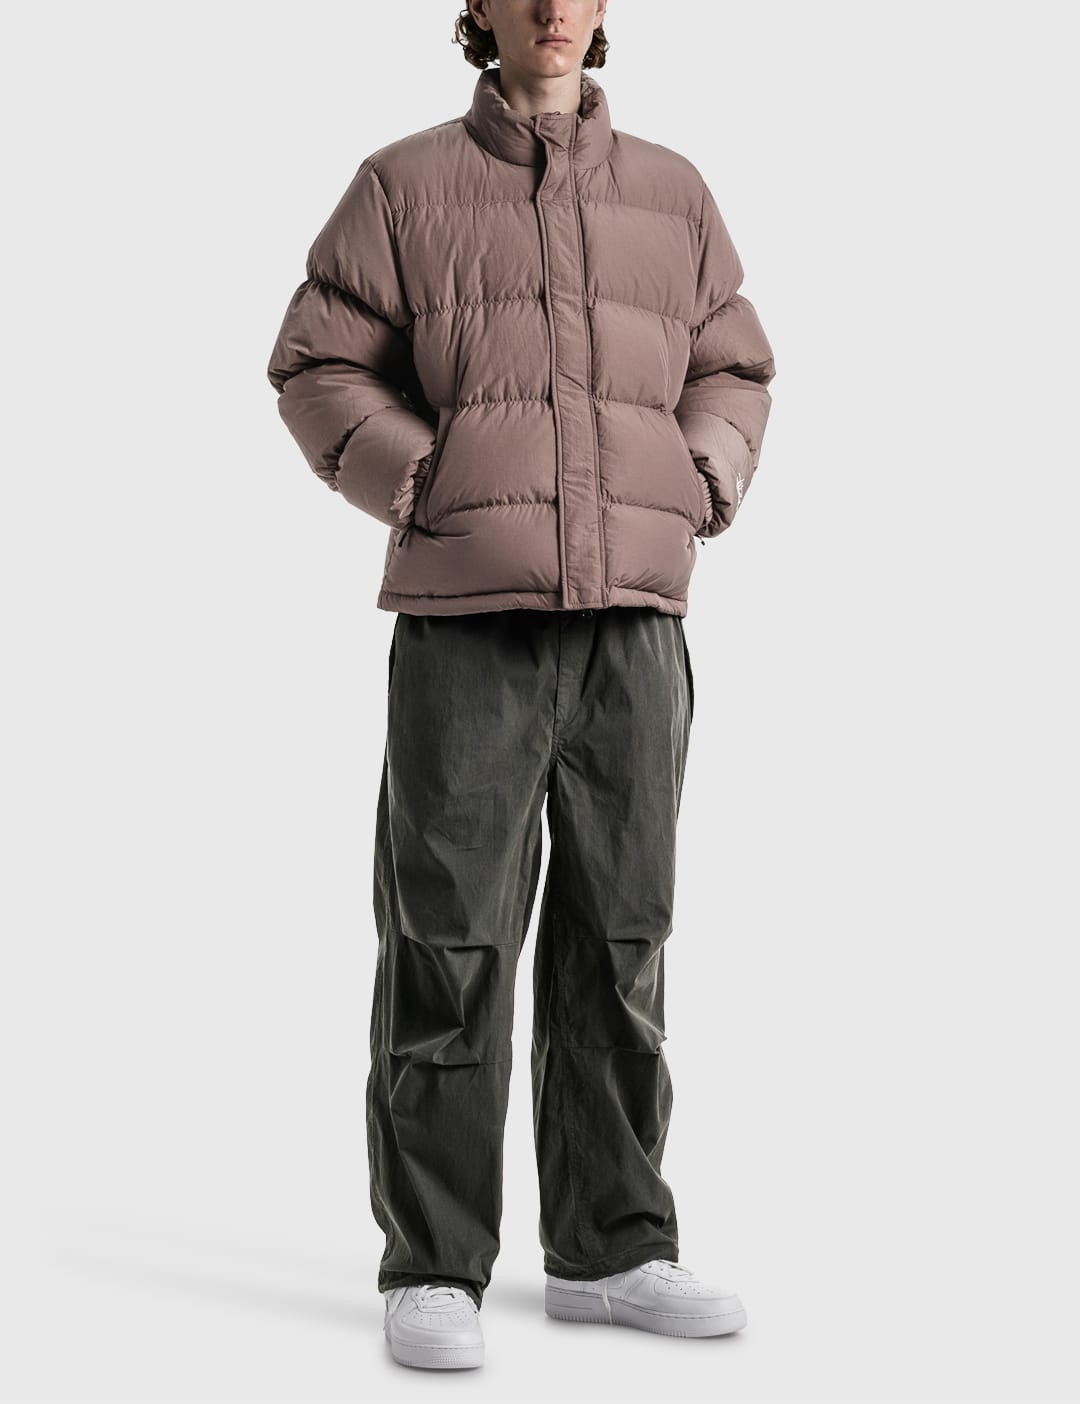 Stüssy - NYCO Over Trousers | HBX - Globally Curated Fashion and 